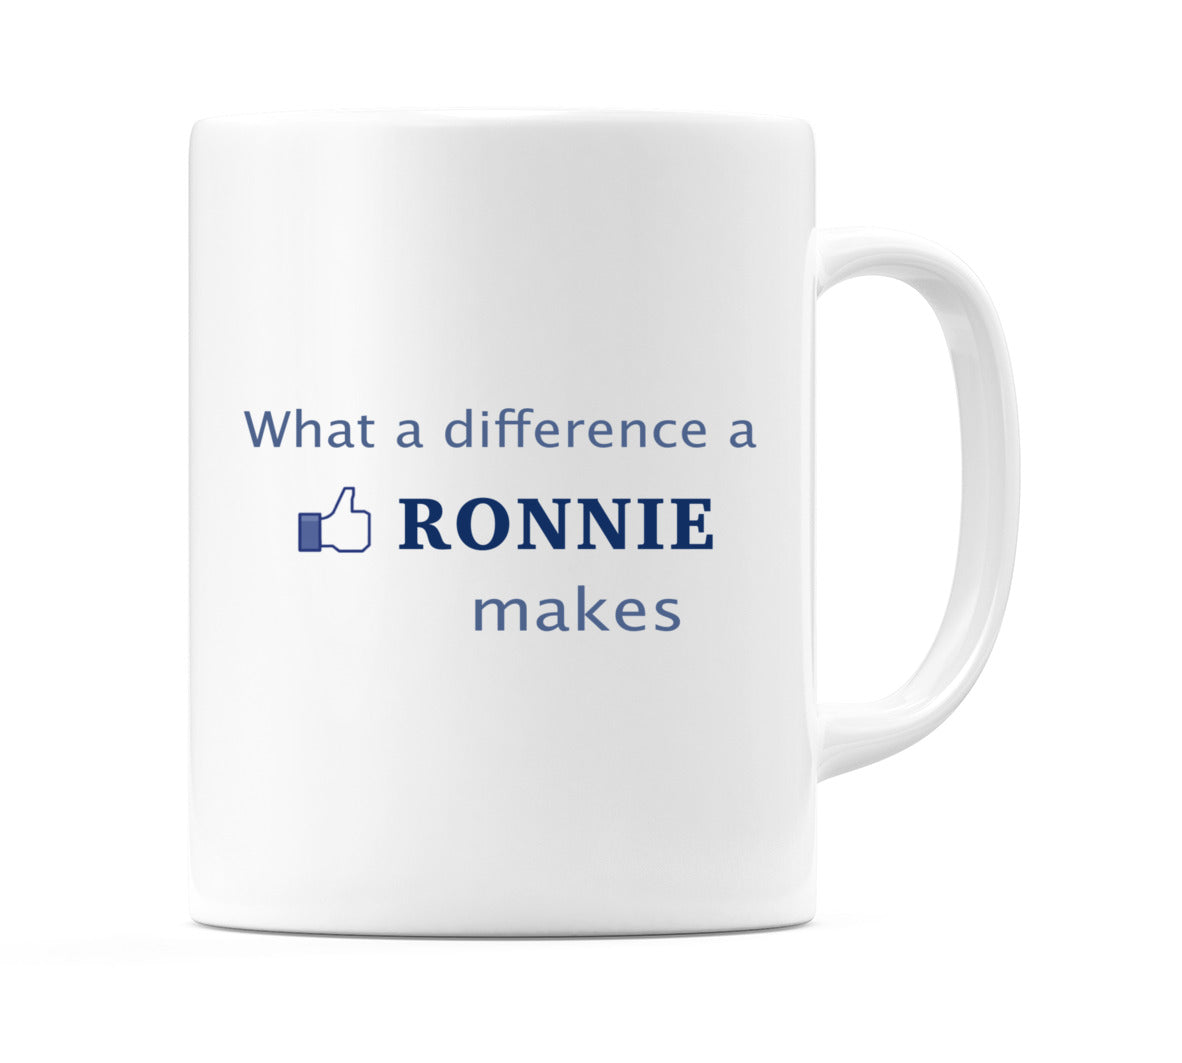 What a difference a Ronnie makes Mug